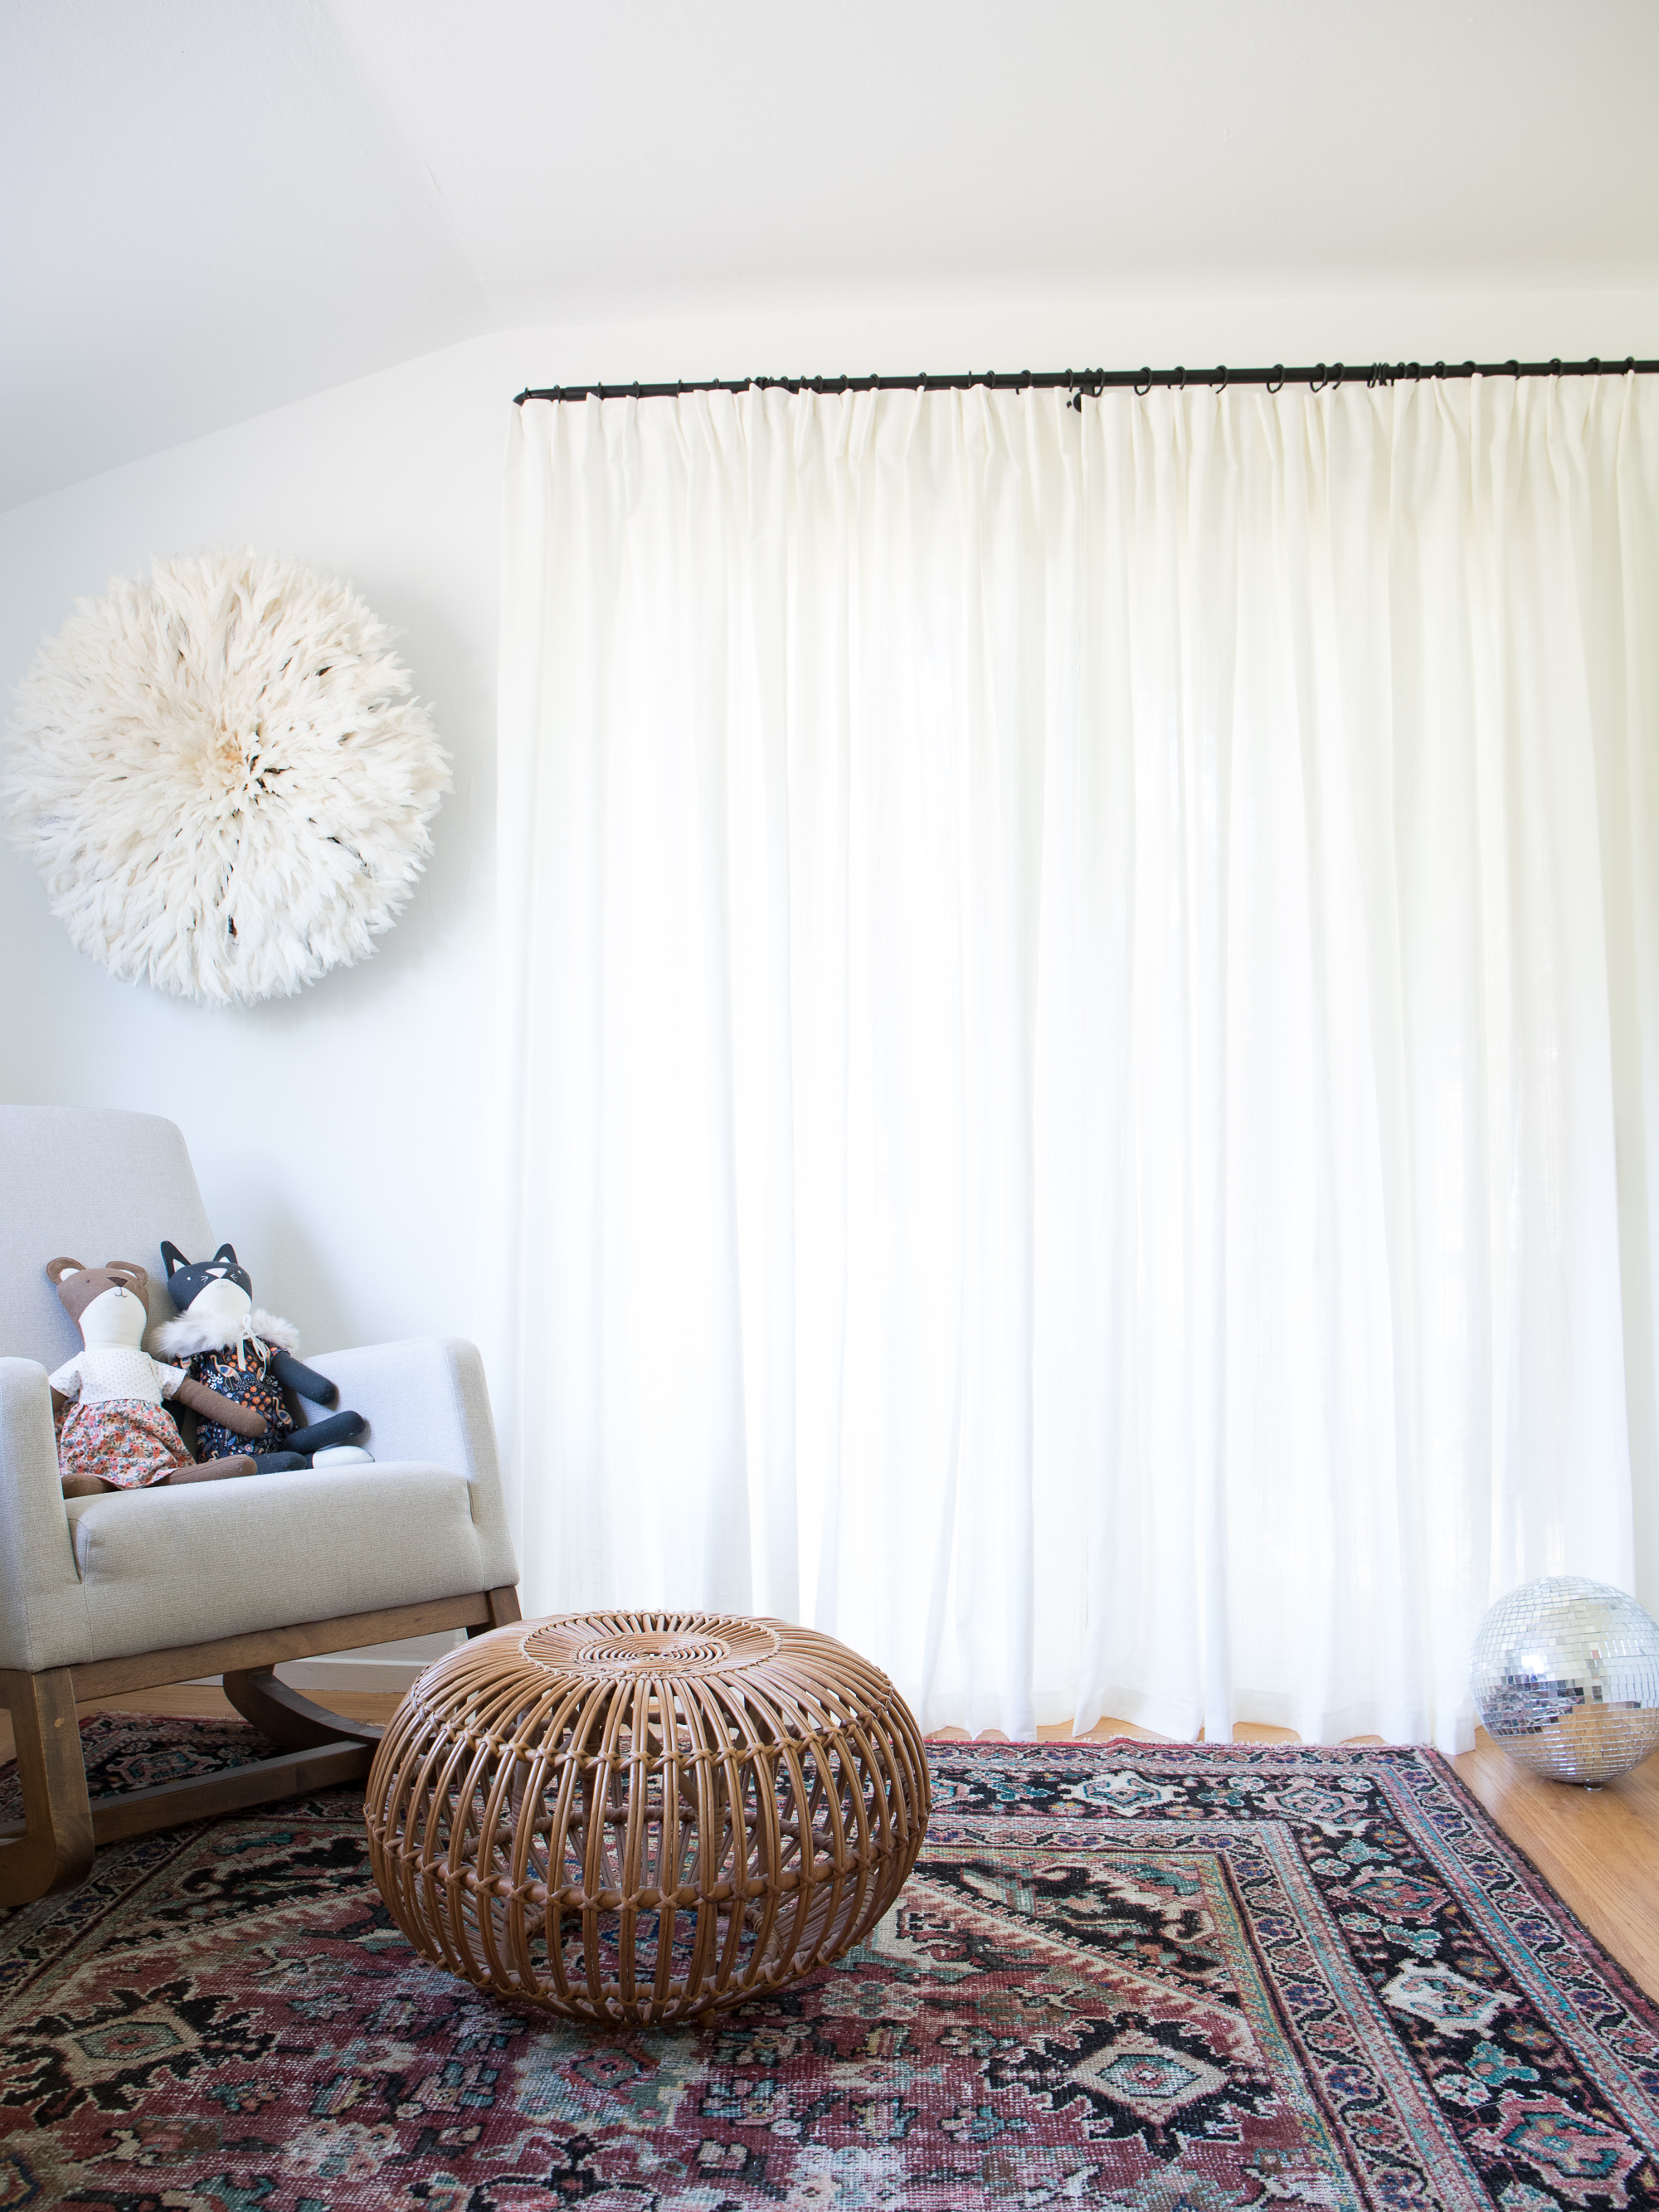 IKEA HACK: Pinched Pleat Curtains